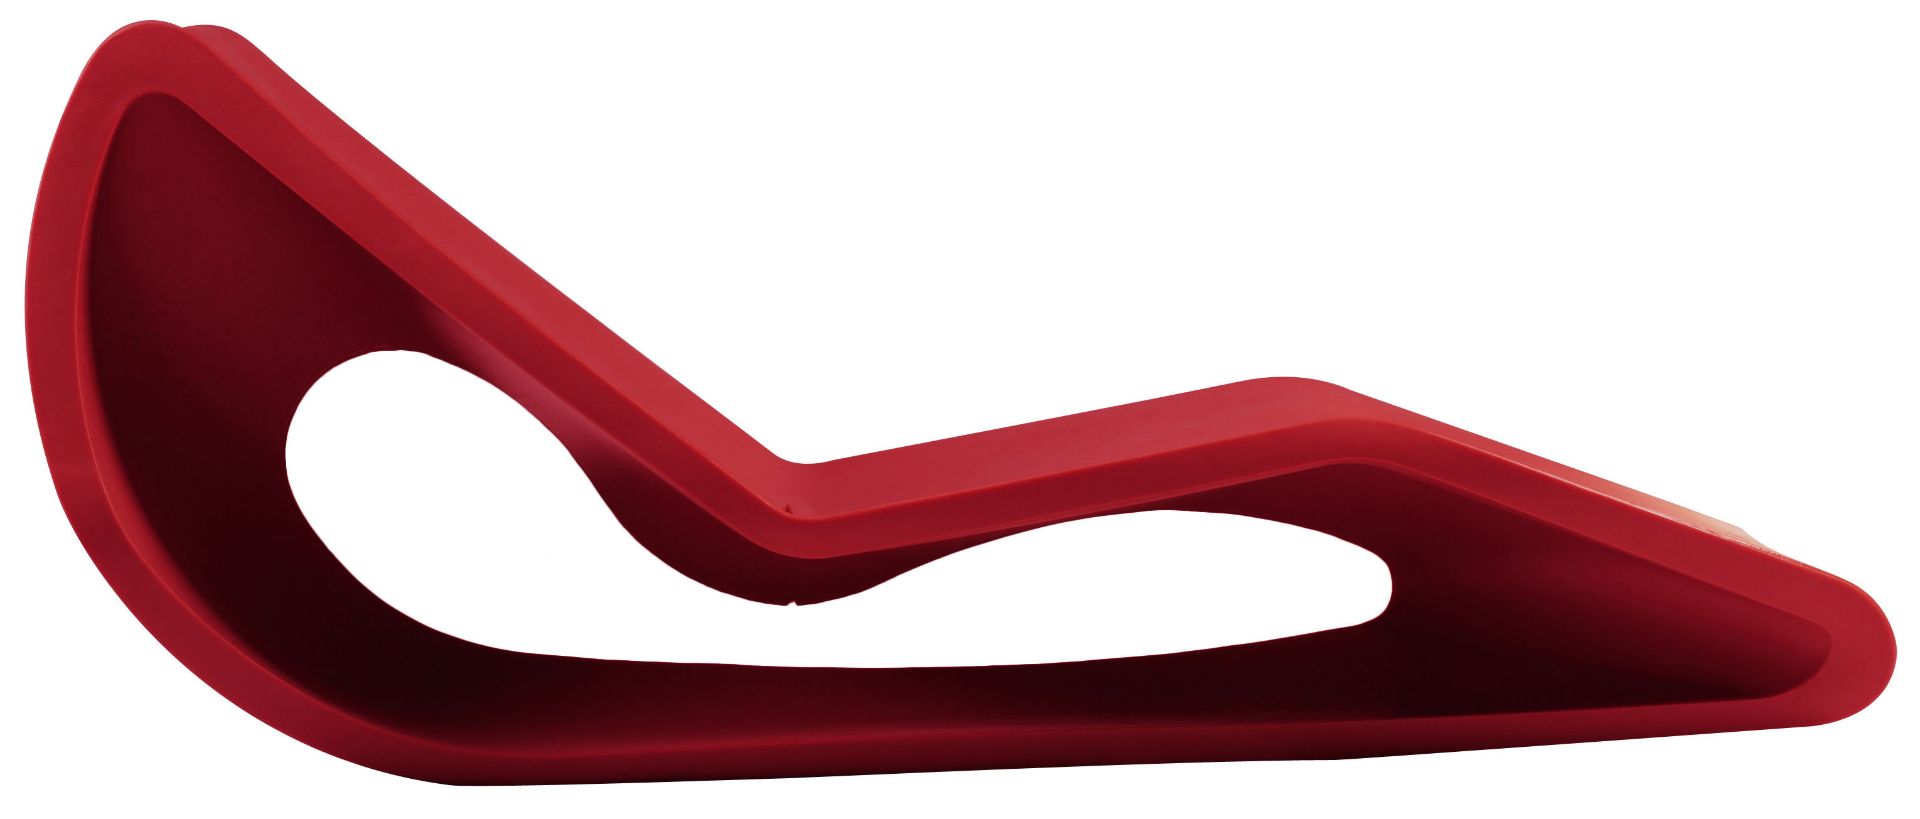 1 x Qui est Paul Sculptural All Weather Chaise Pool Lounger In Red - Brand New Boxed Stock - Image 3 of 8